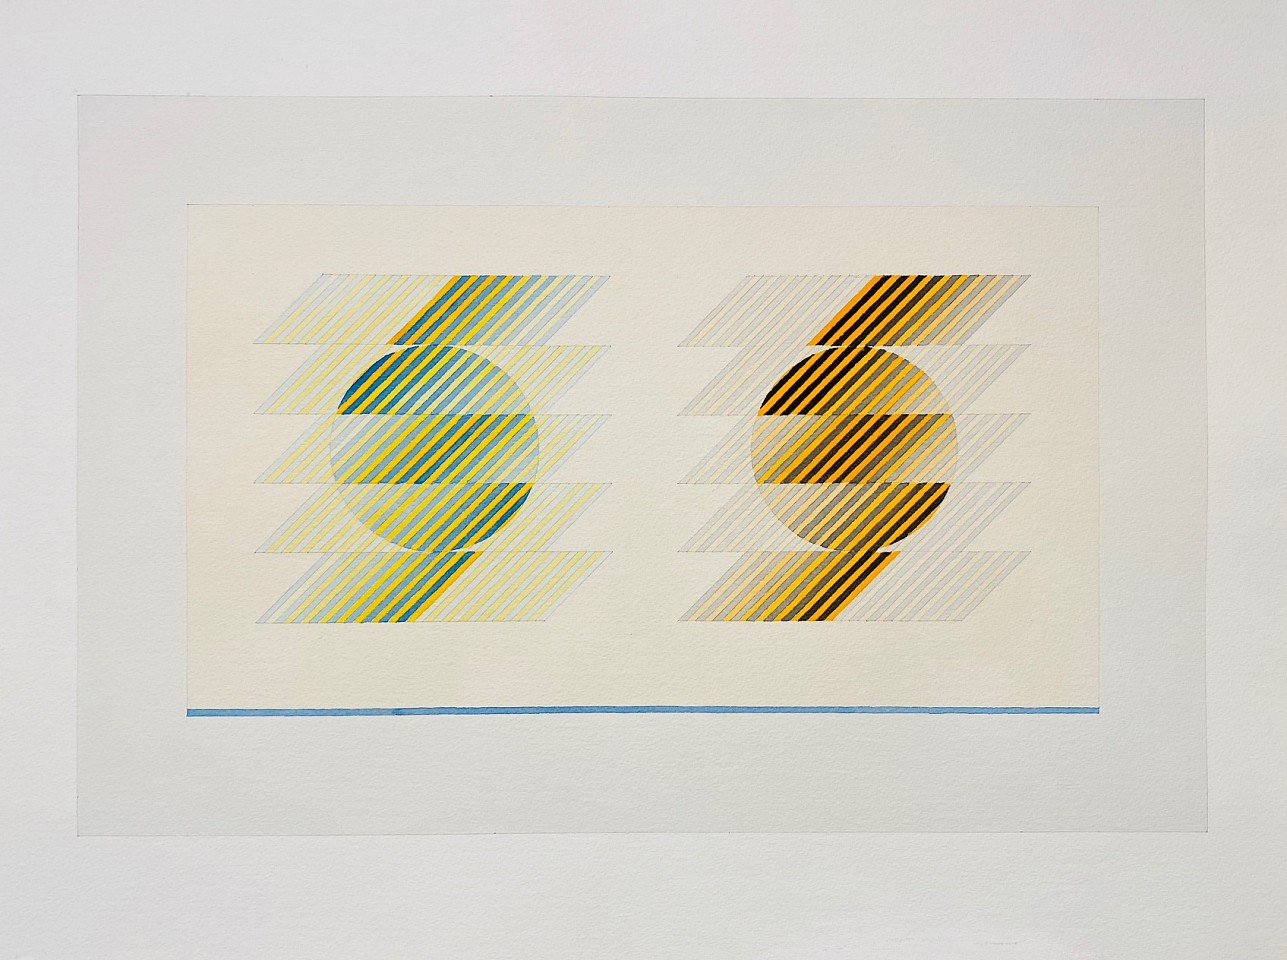 Sewell Sillman, 2 Orbs and Blue Line
watercolor and pencil on paper, SS: 18"" x 24""  IS: 13 1/2"" x 20 1/2""
JCA 6393
$4,500